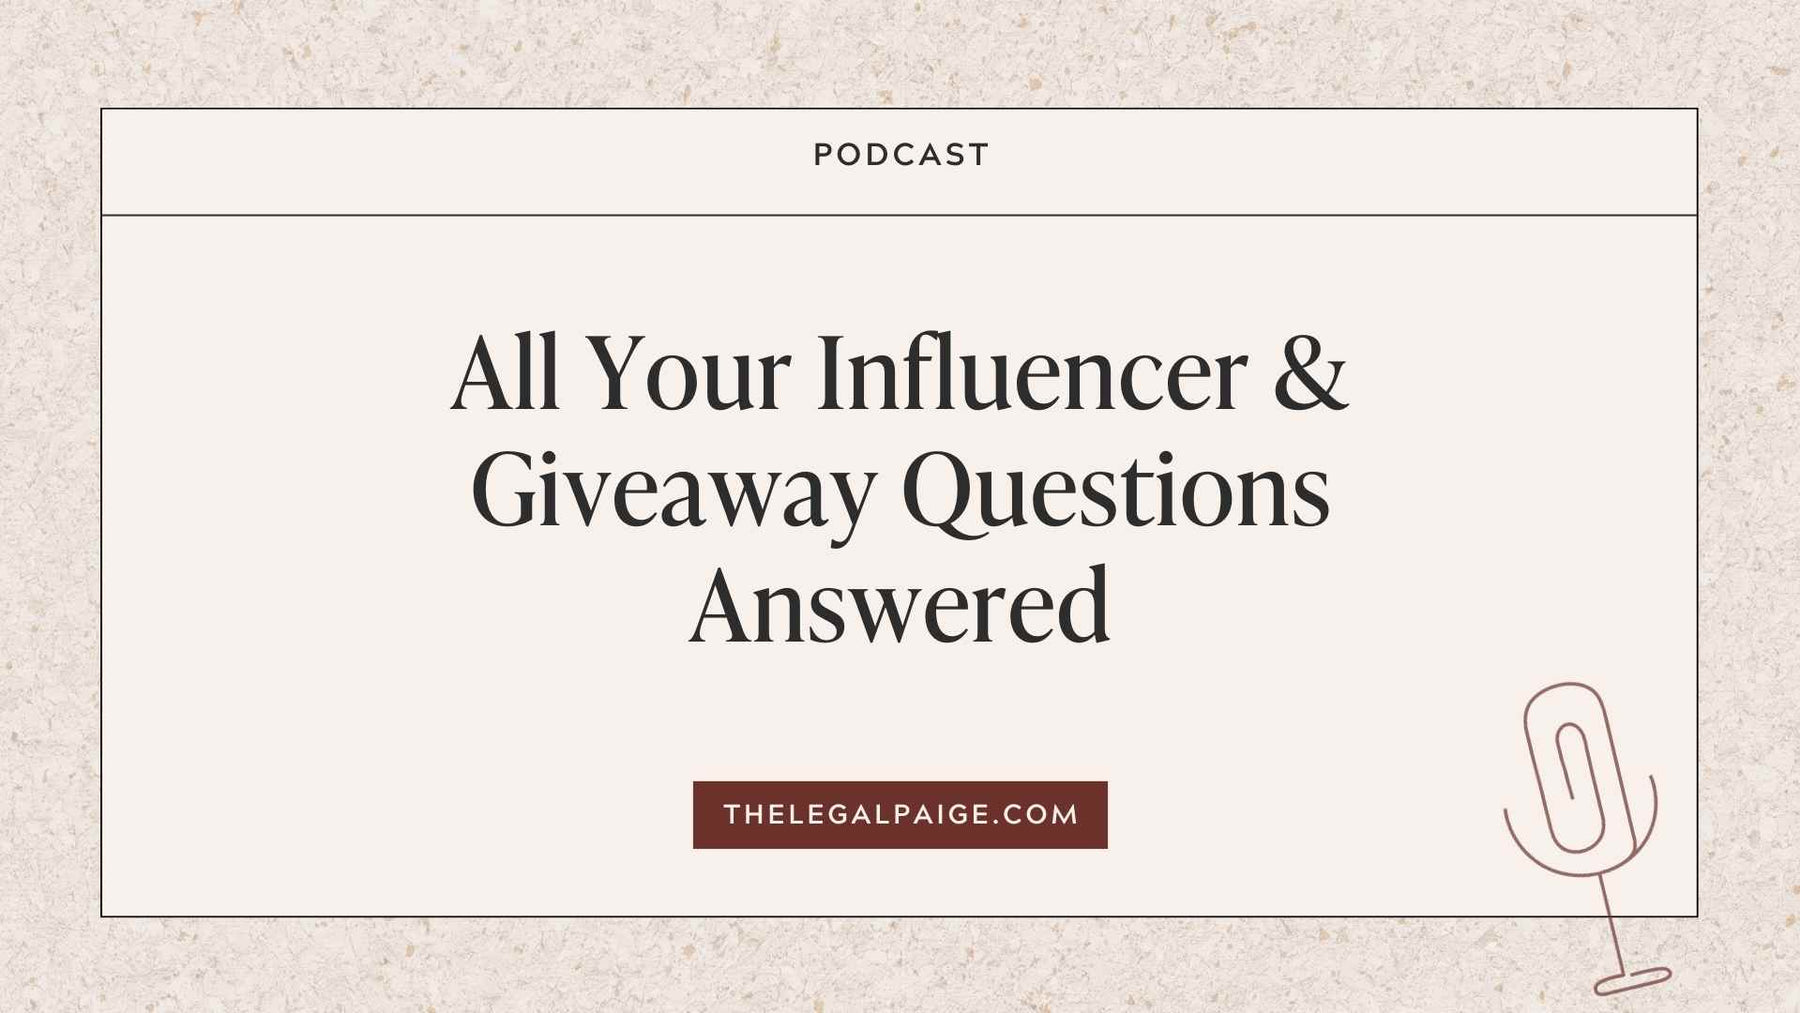 Episode 41: All Your Influencer & Giveaway Questions Answered